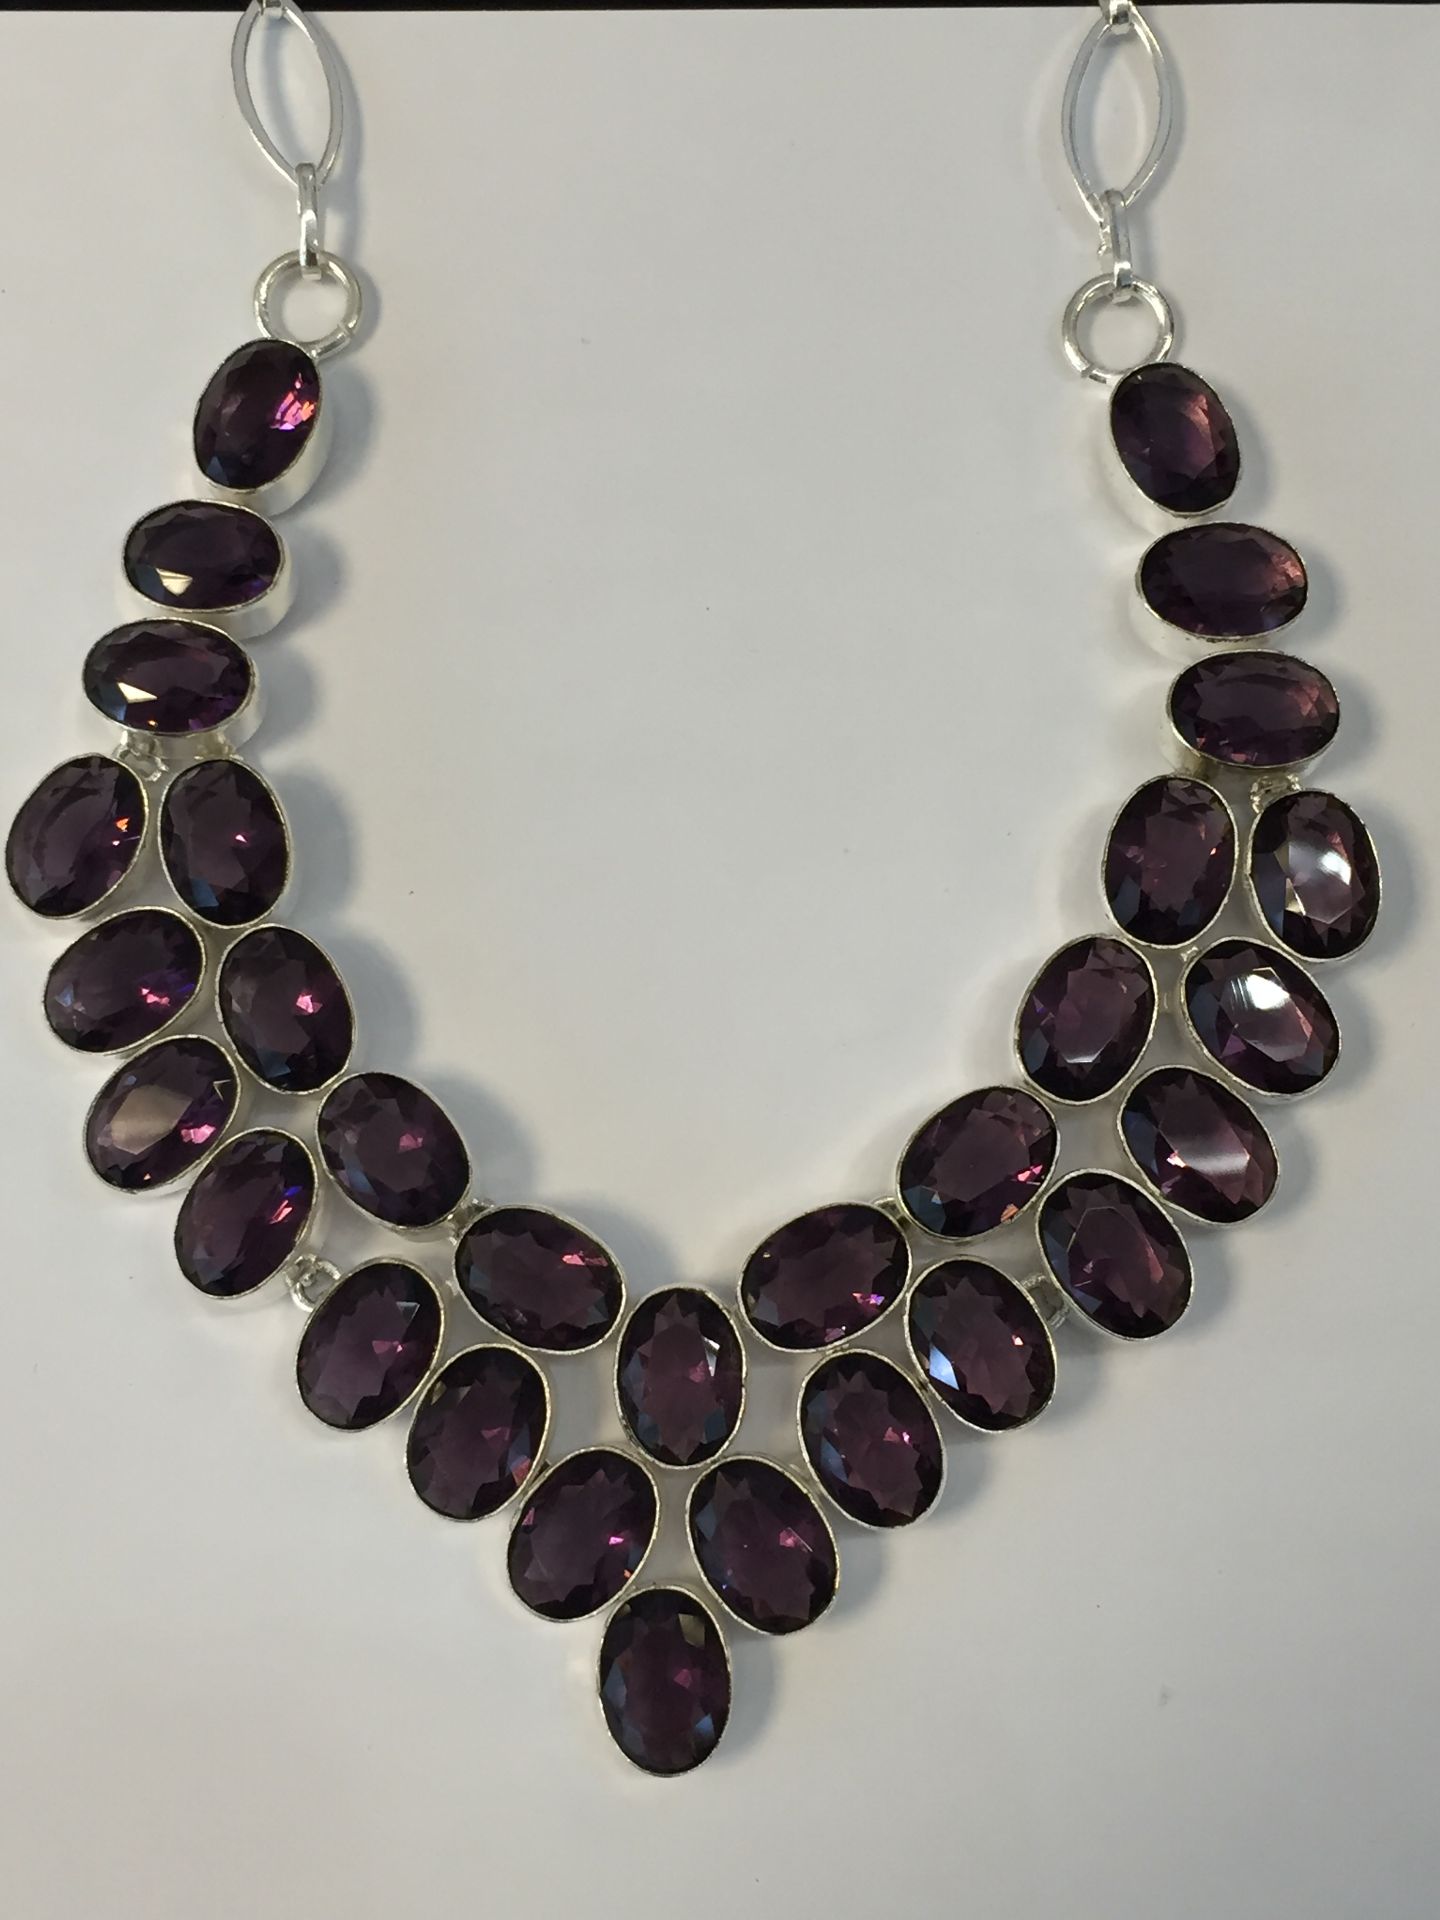 AFRICIAN AMETHYST 925 SILVER JEWELRY NECKLACES SIZE 17-18" 5211 - Image 2 of 2